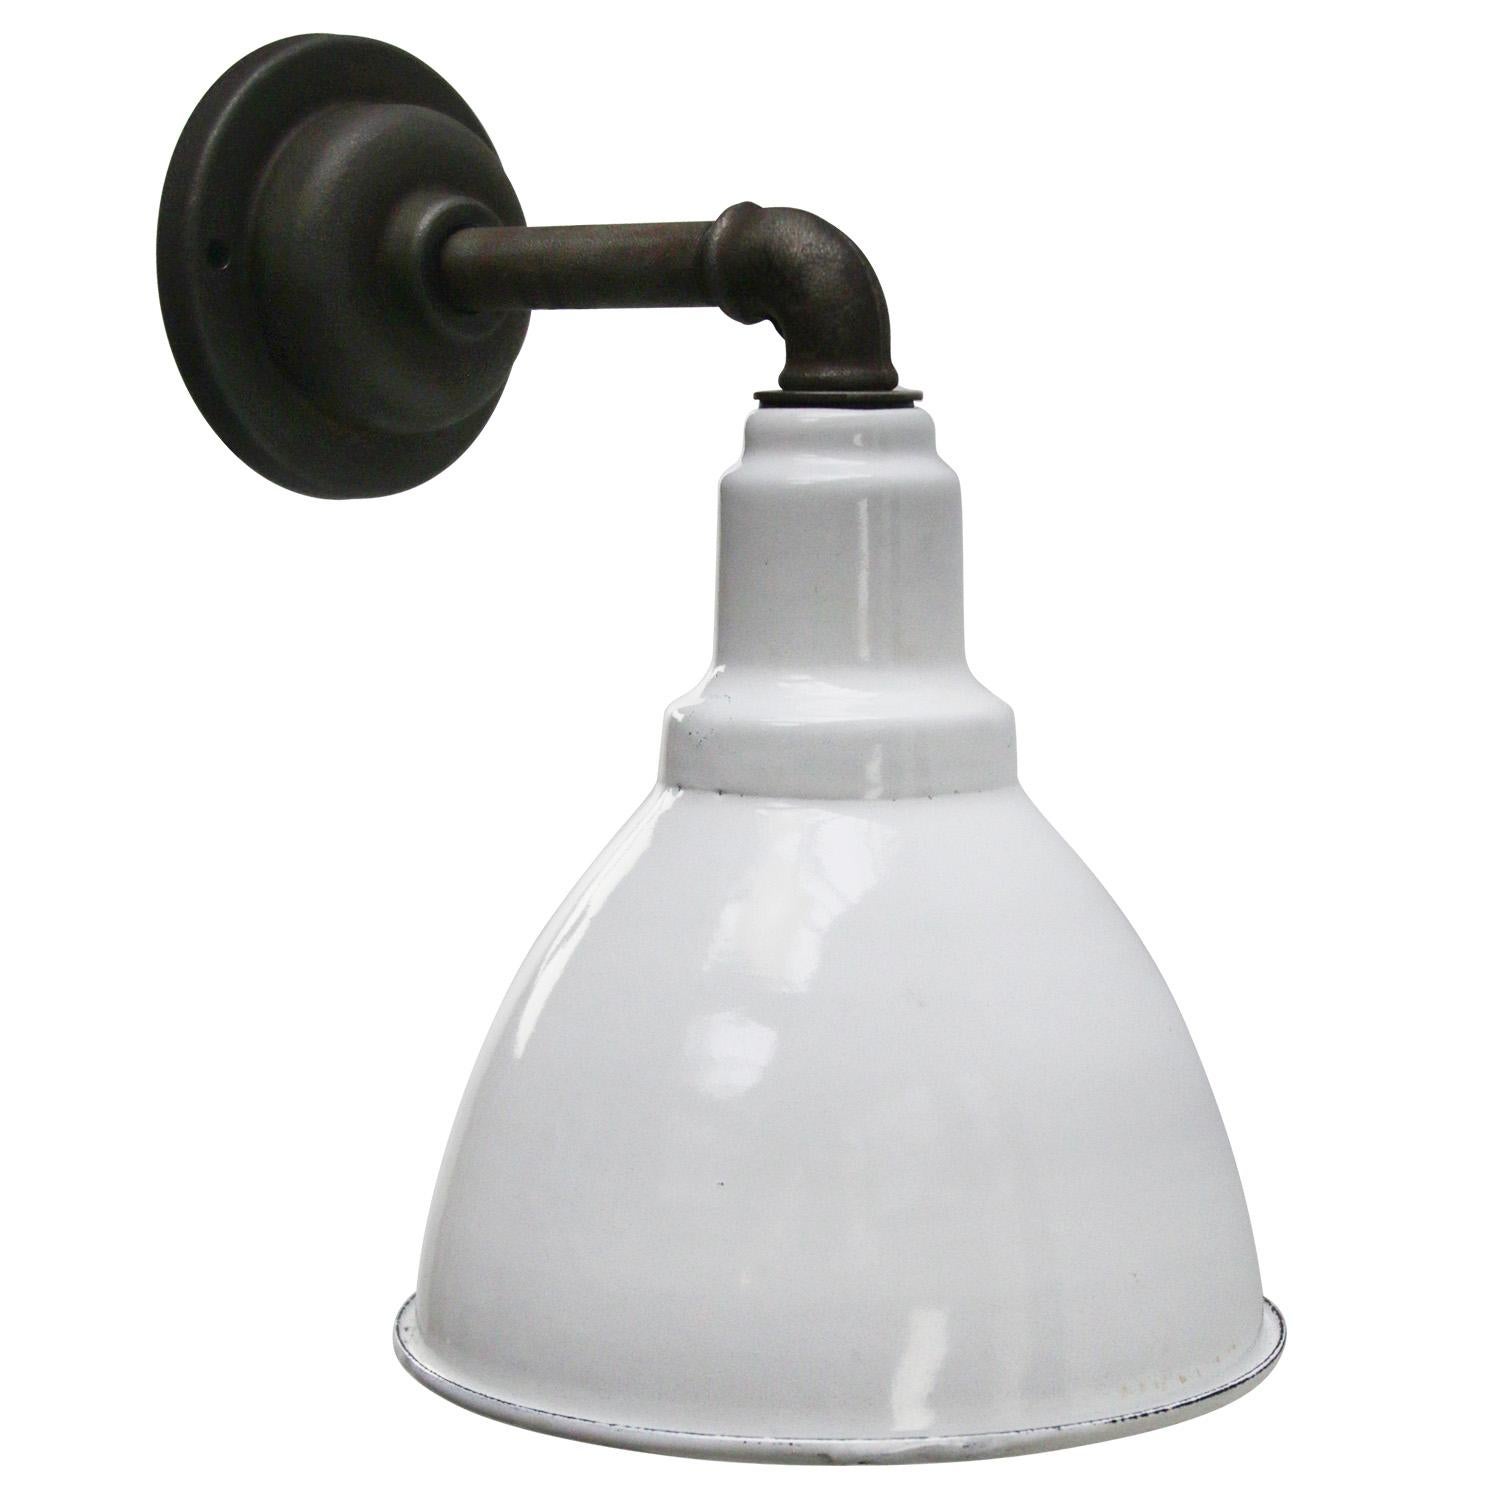 Industrial wall light
White enamel shade, cast iron arm and wall plate

Siameter cast iron wall piece: 10.5 cm / 4”, 2 holes to secure

Weight: 1.80 kg / 4 lb

Priced per individual item. All lamps have been made suitable by international standards